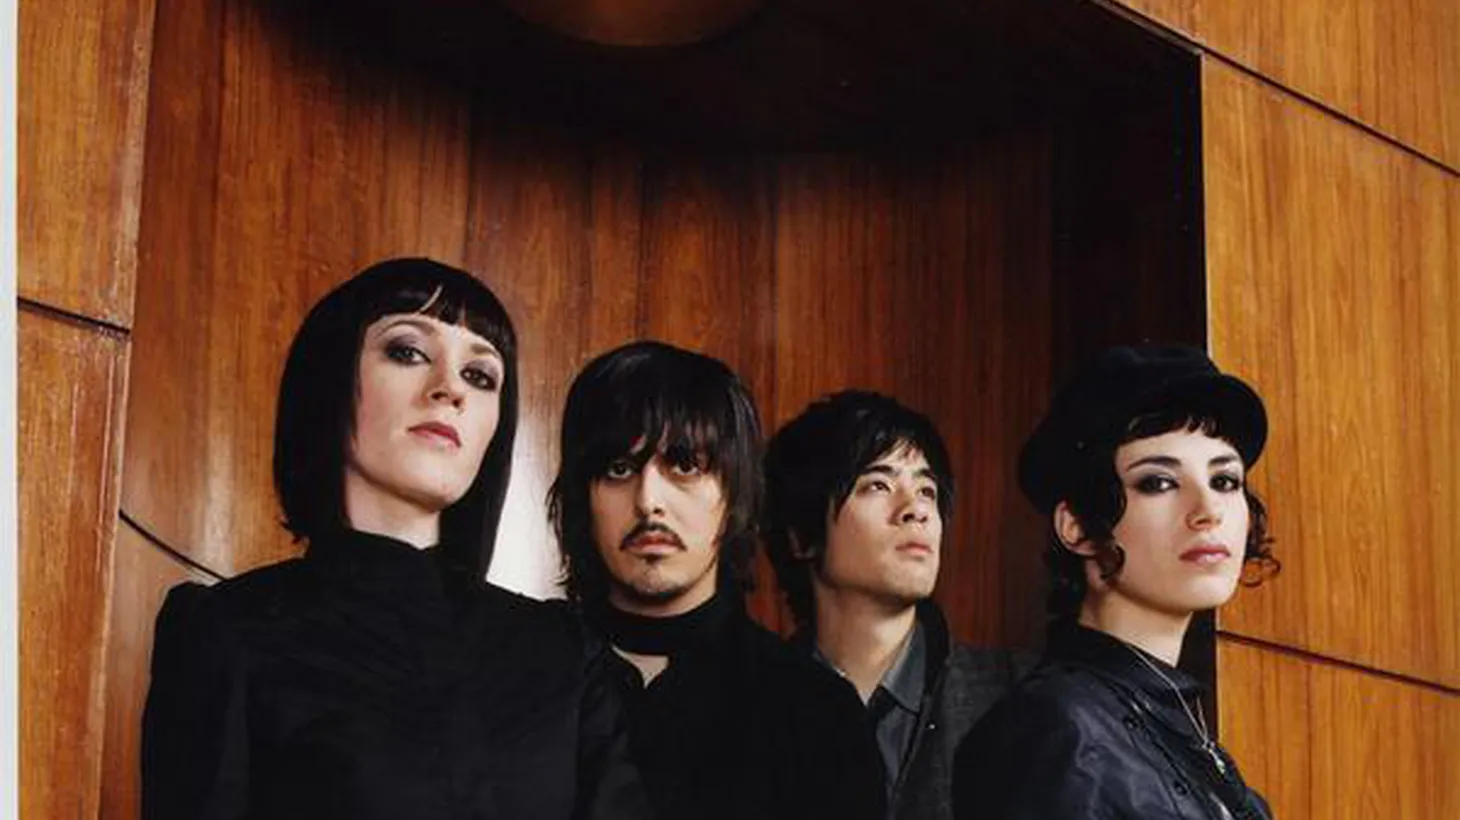 Ladytron bring an electro new-wave order to Morning Becomes Eclectic at 11:15am.